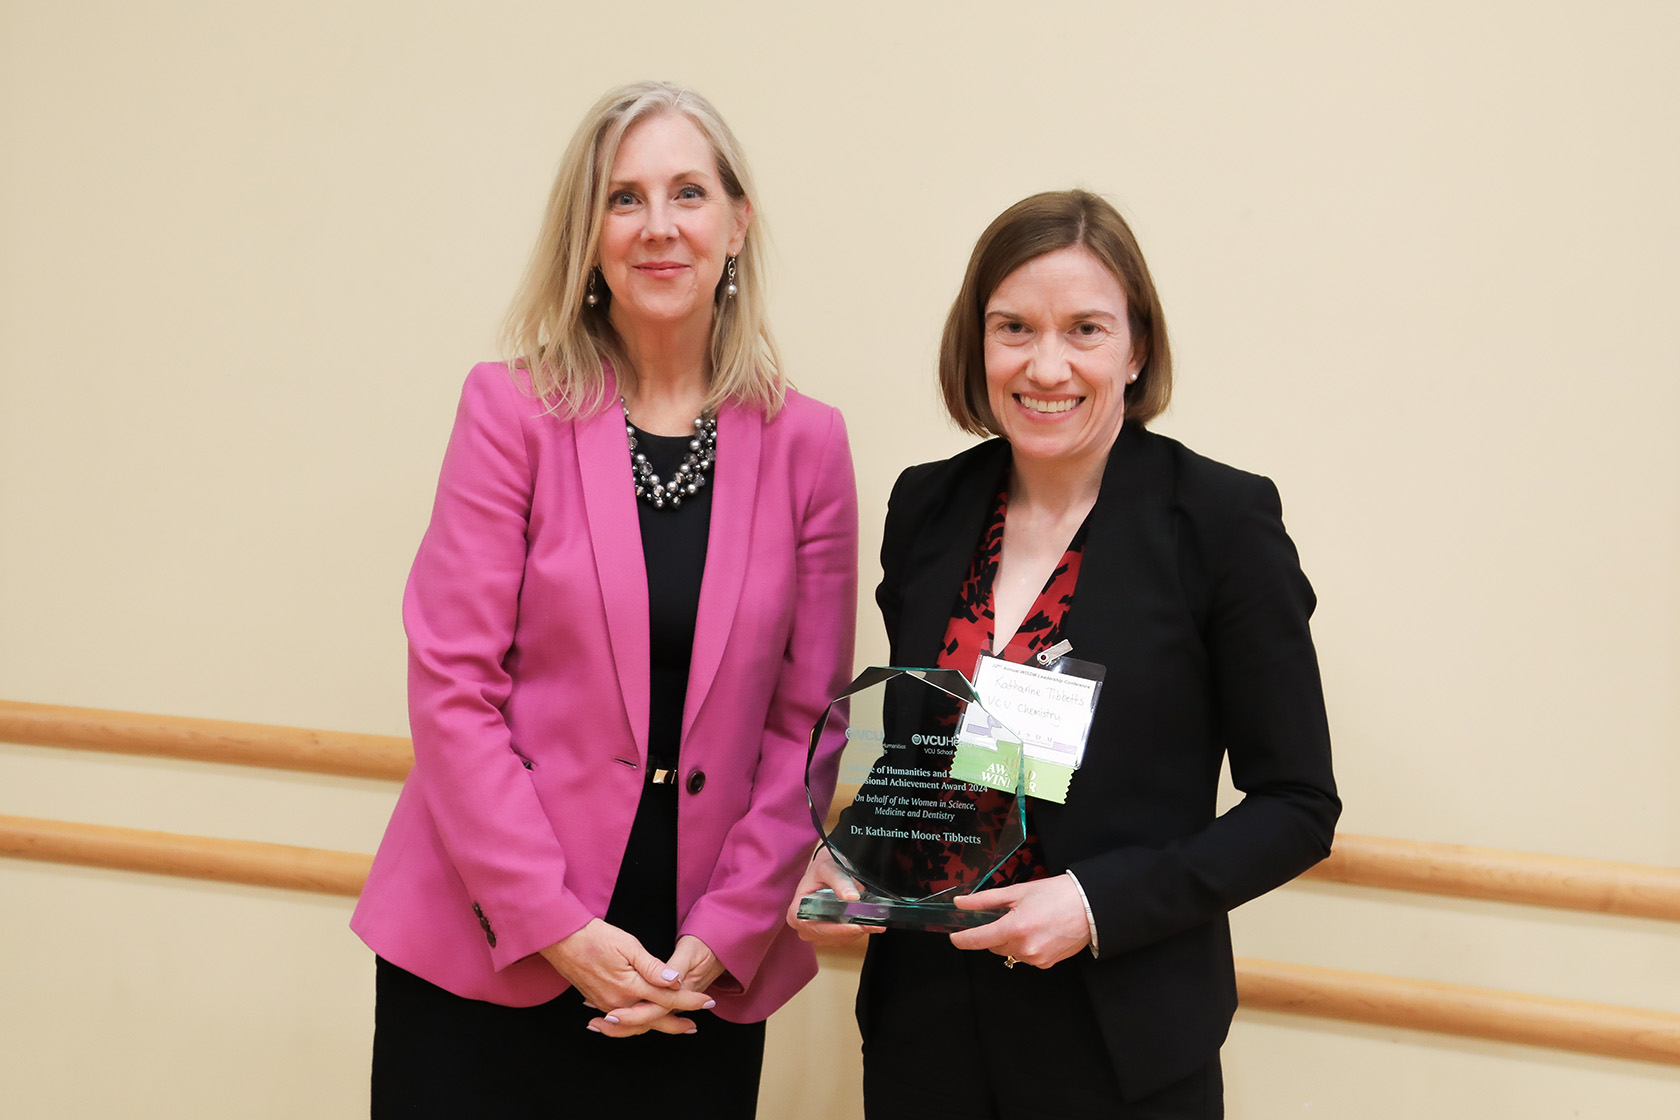 Katharine Tibbetts (right), stands beside CHS Dean Catherine Ingrassia, holding her professional achievement award